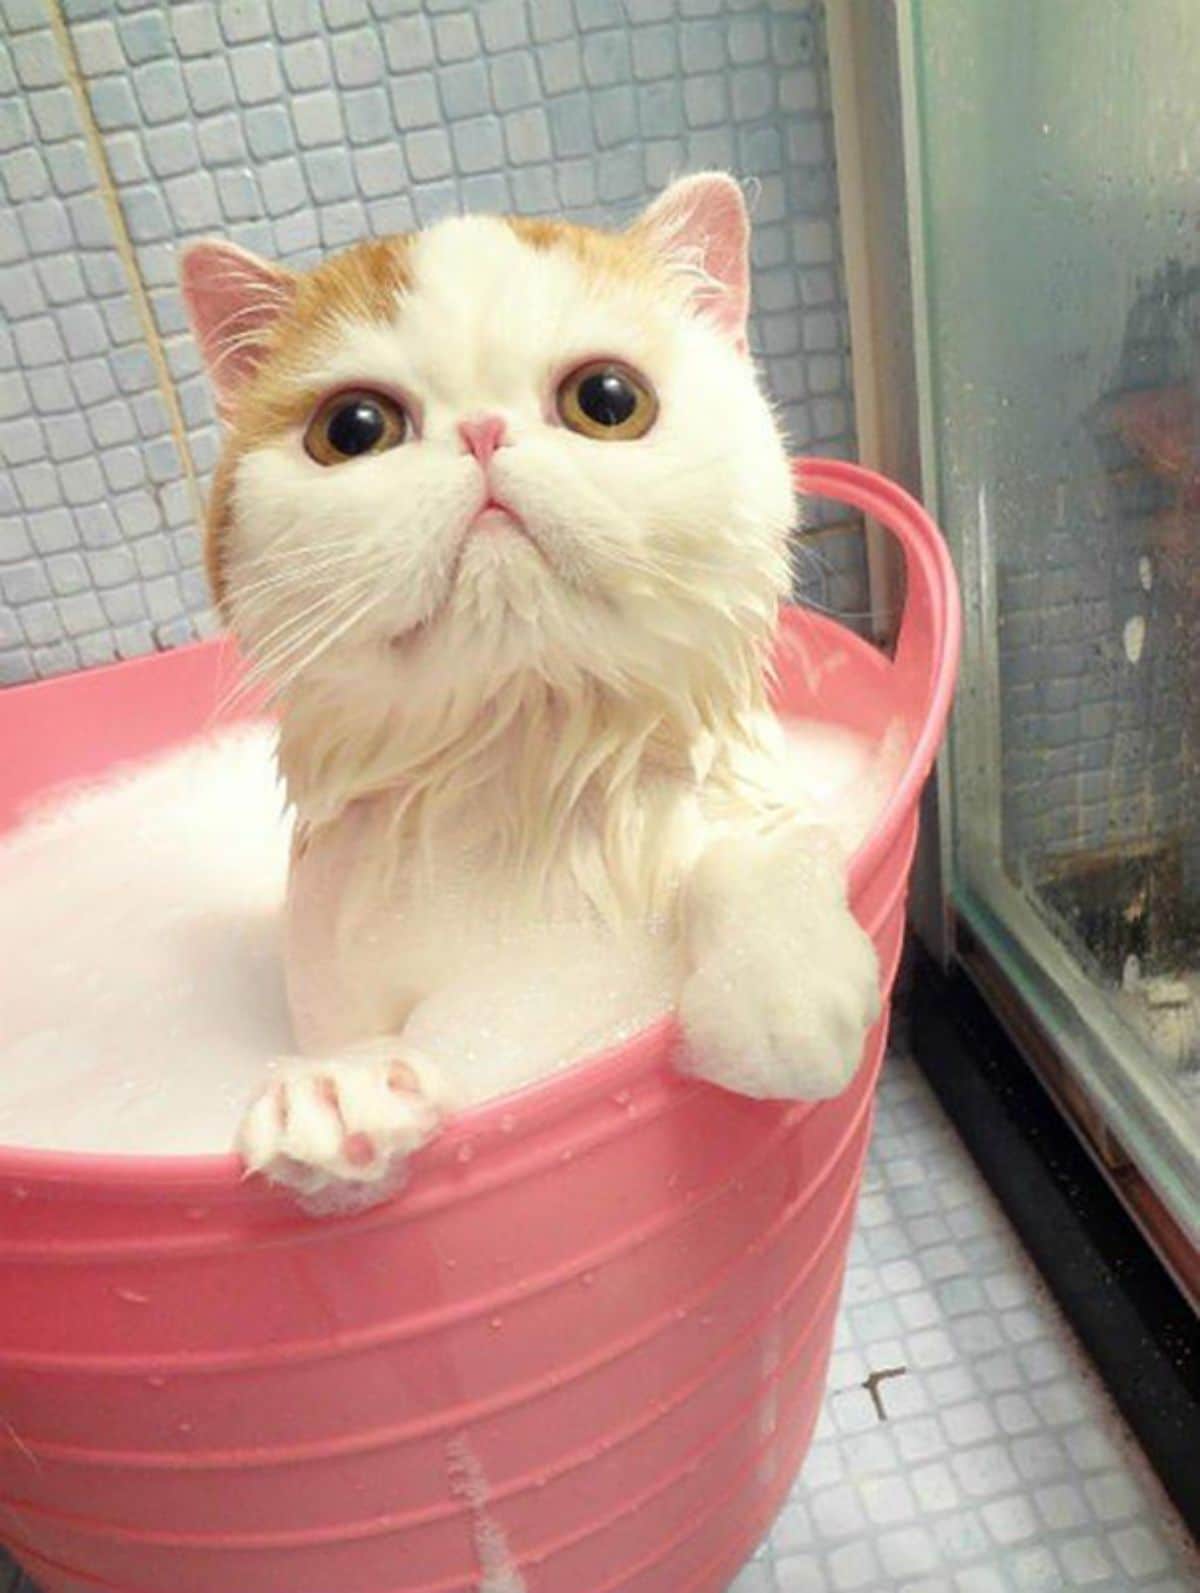 white and orange cat sitting up in a pink bucket filled with soapy water